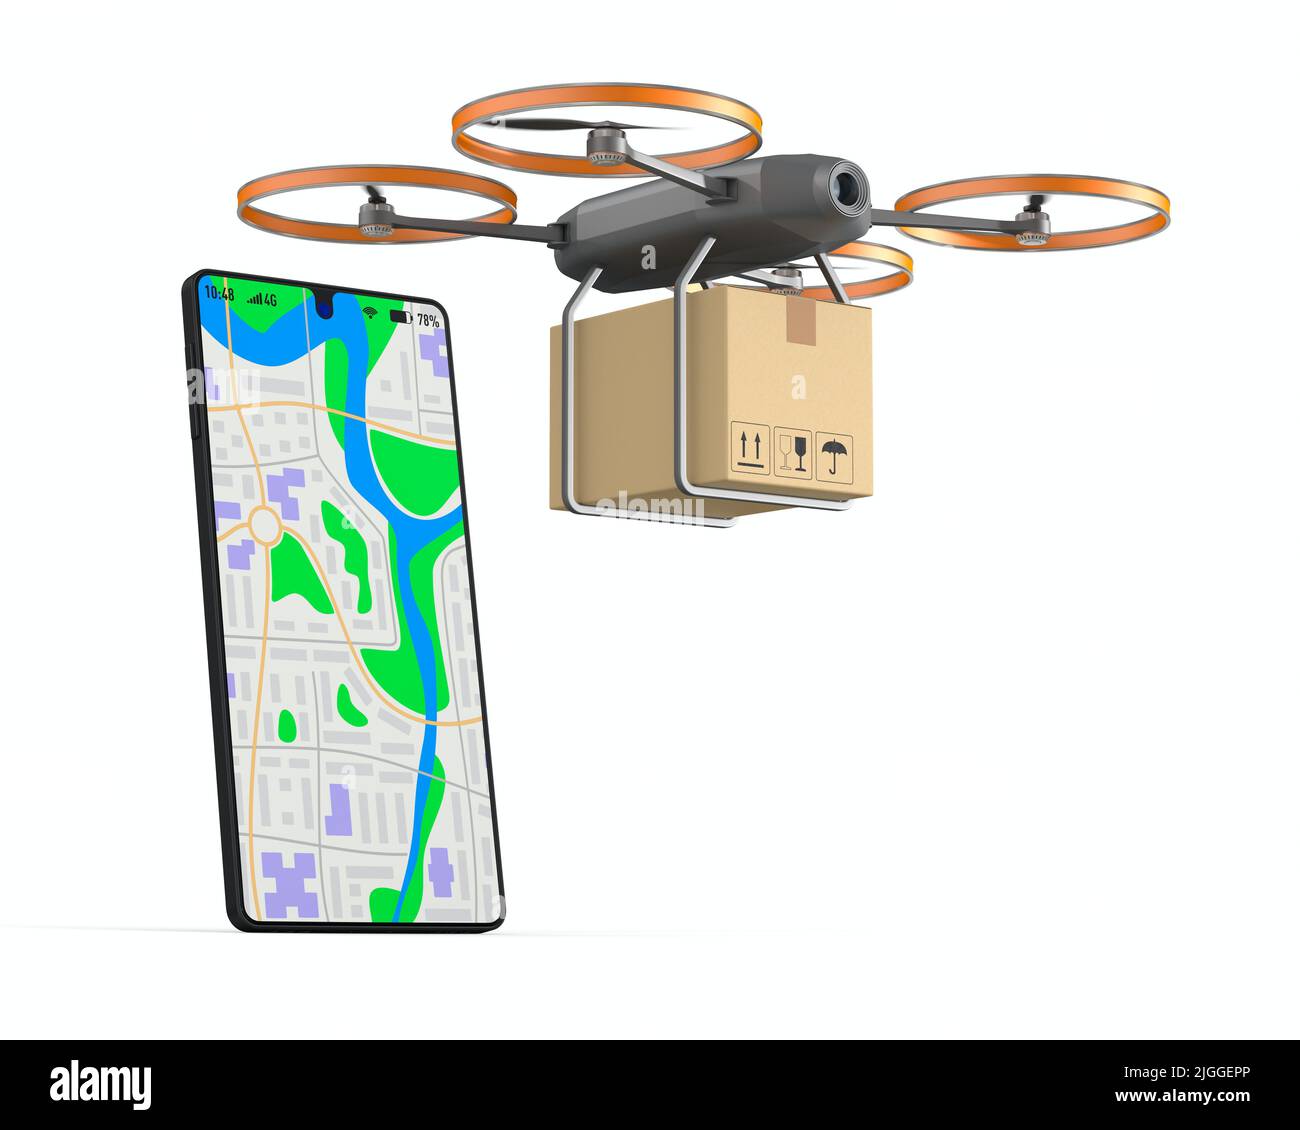 Drone with cargo box and navigation into phone on white background. Isolated 3d illustration Stock Photo